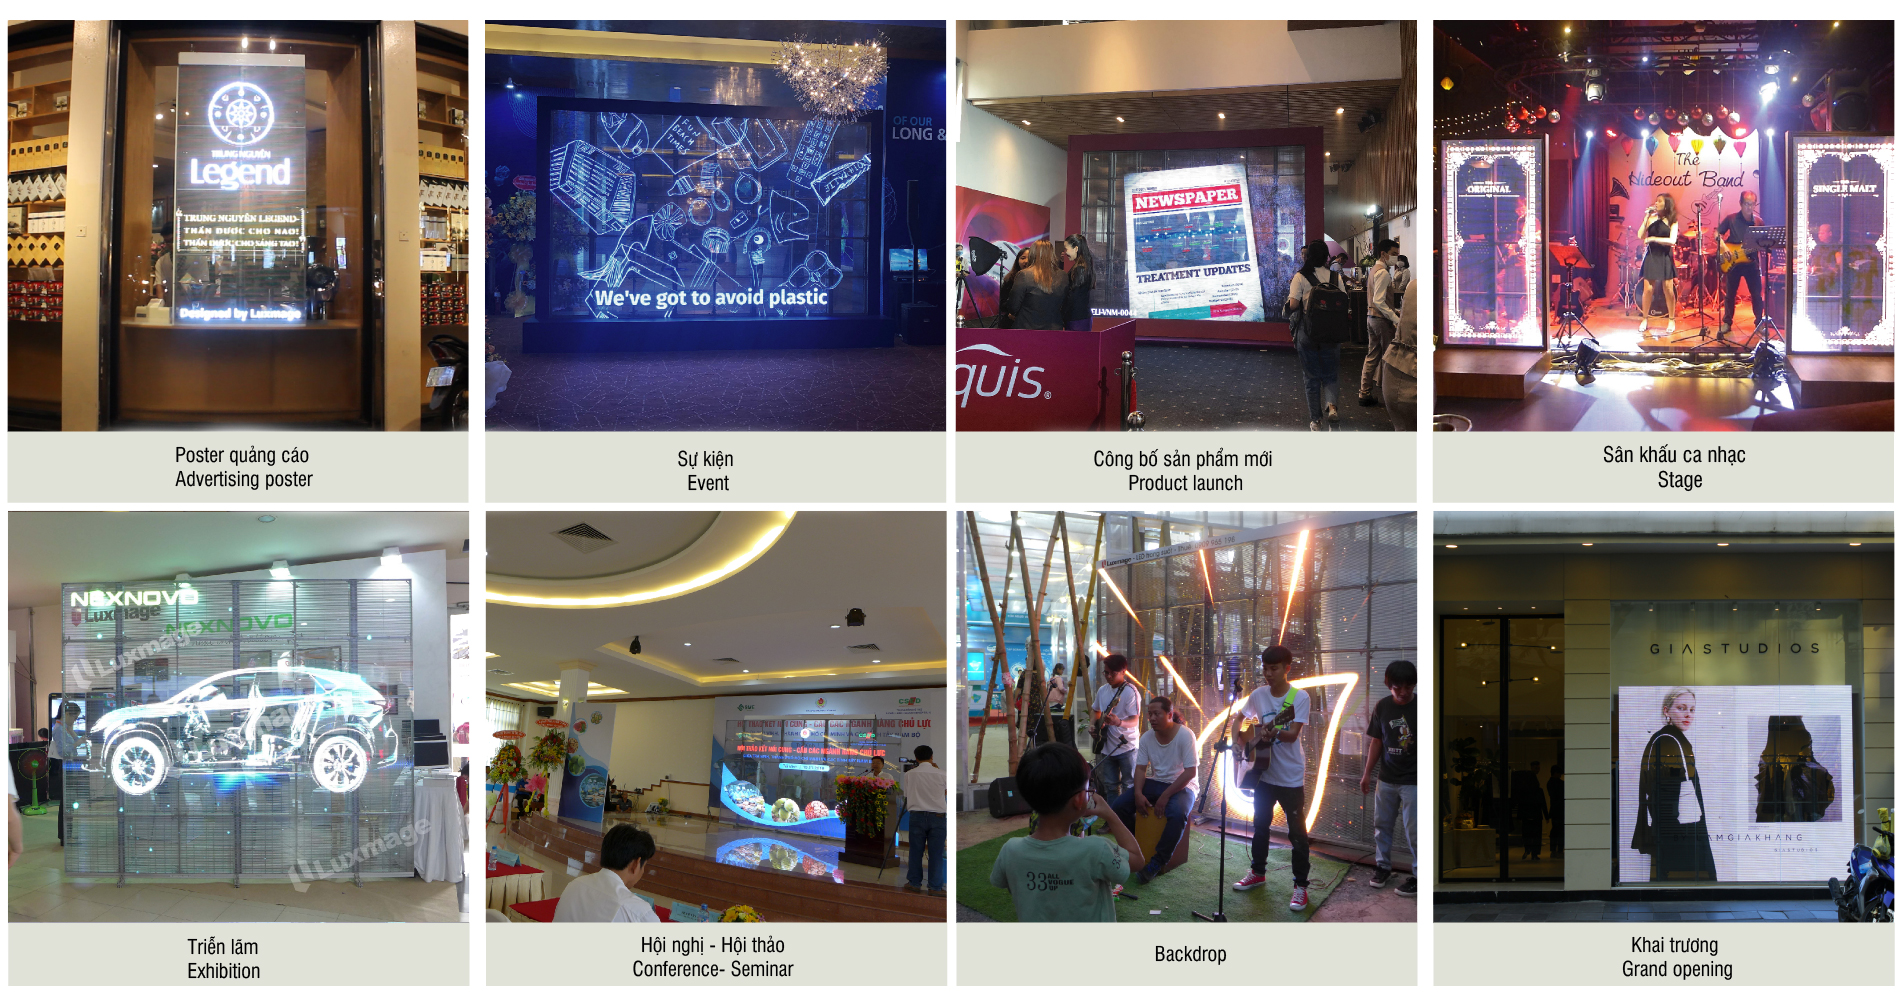 LED screen for Exhibition and Event